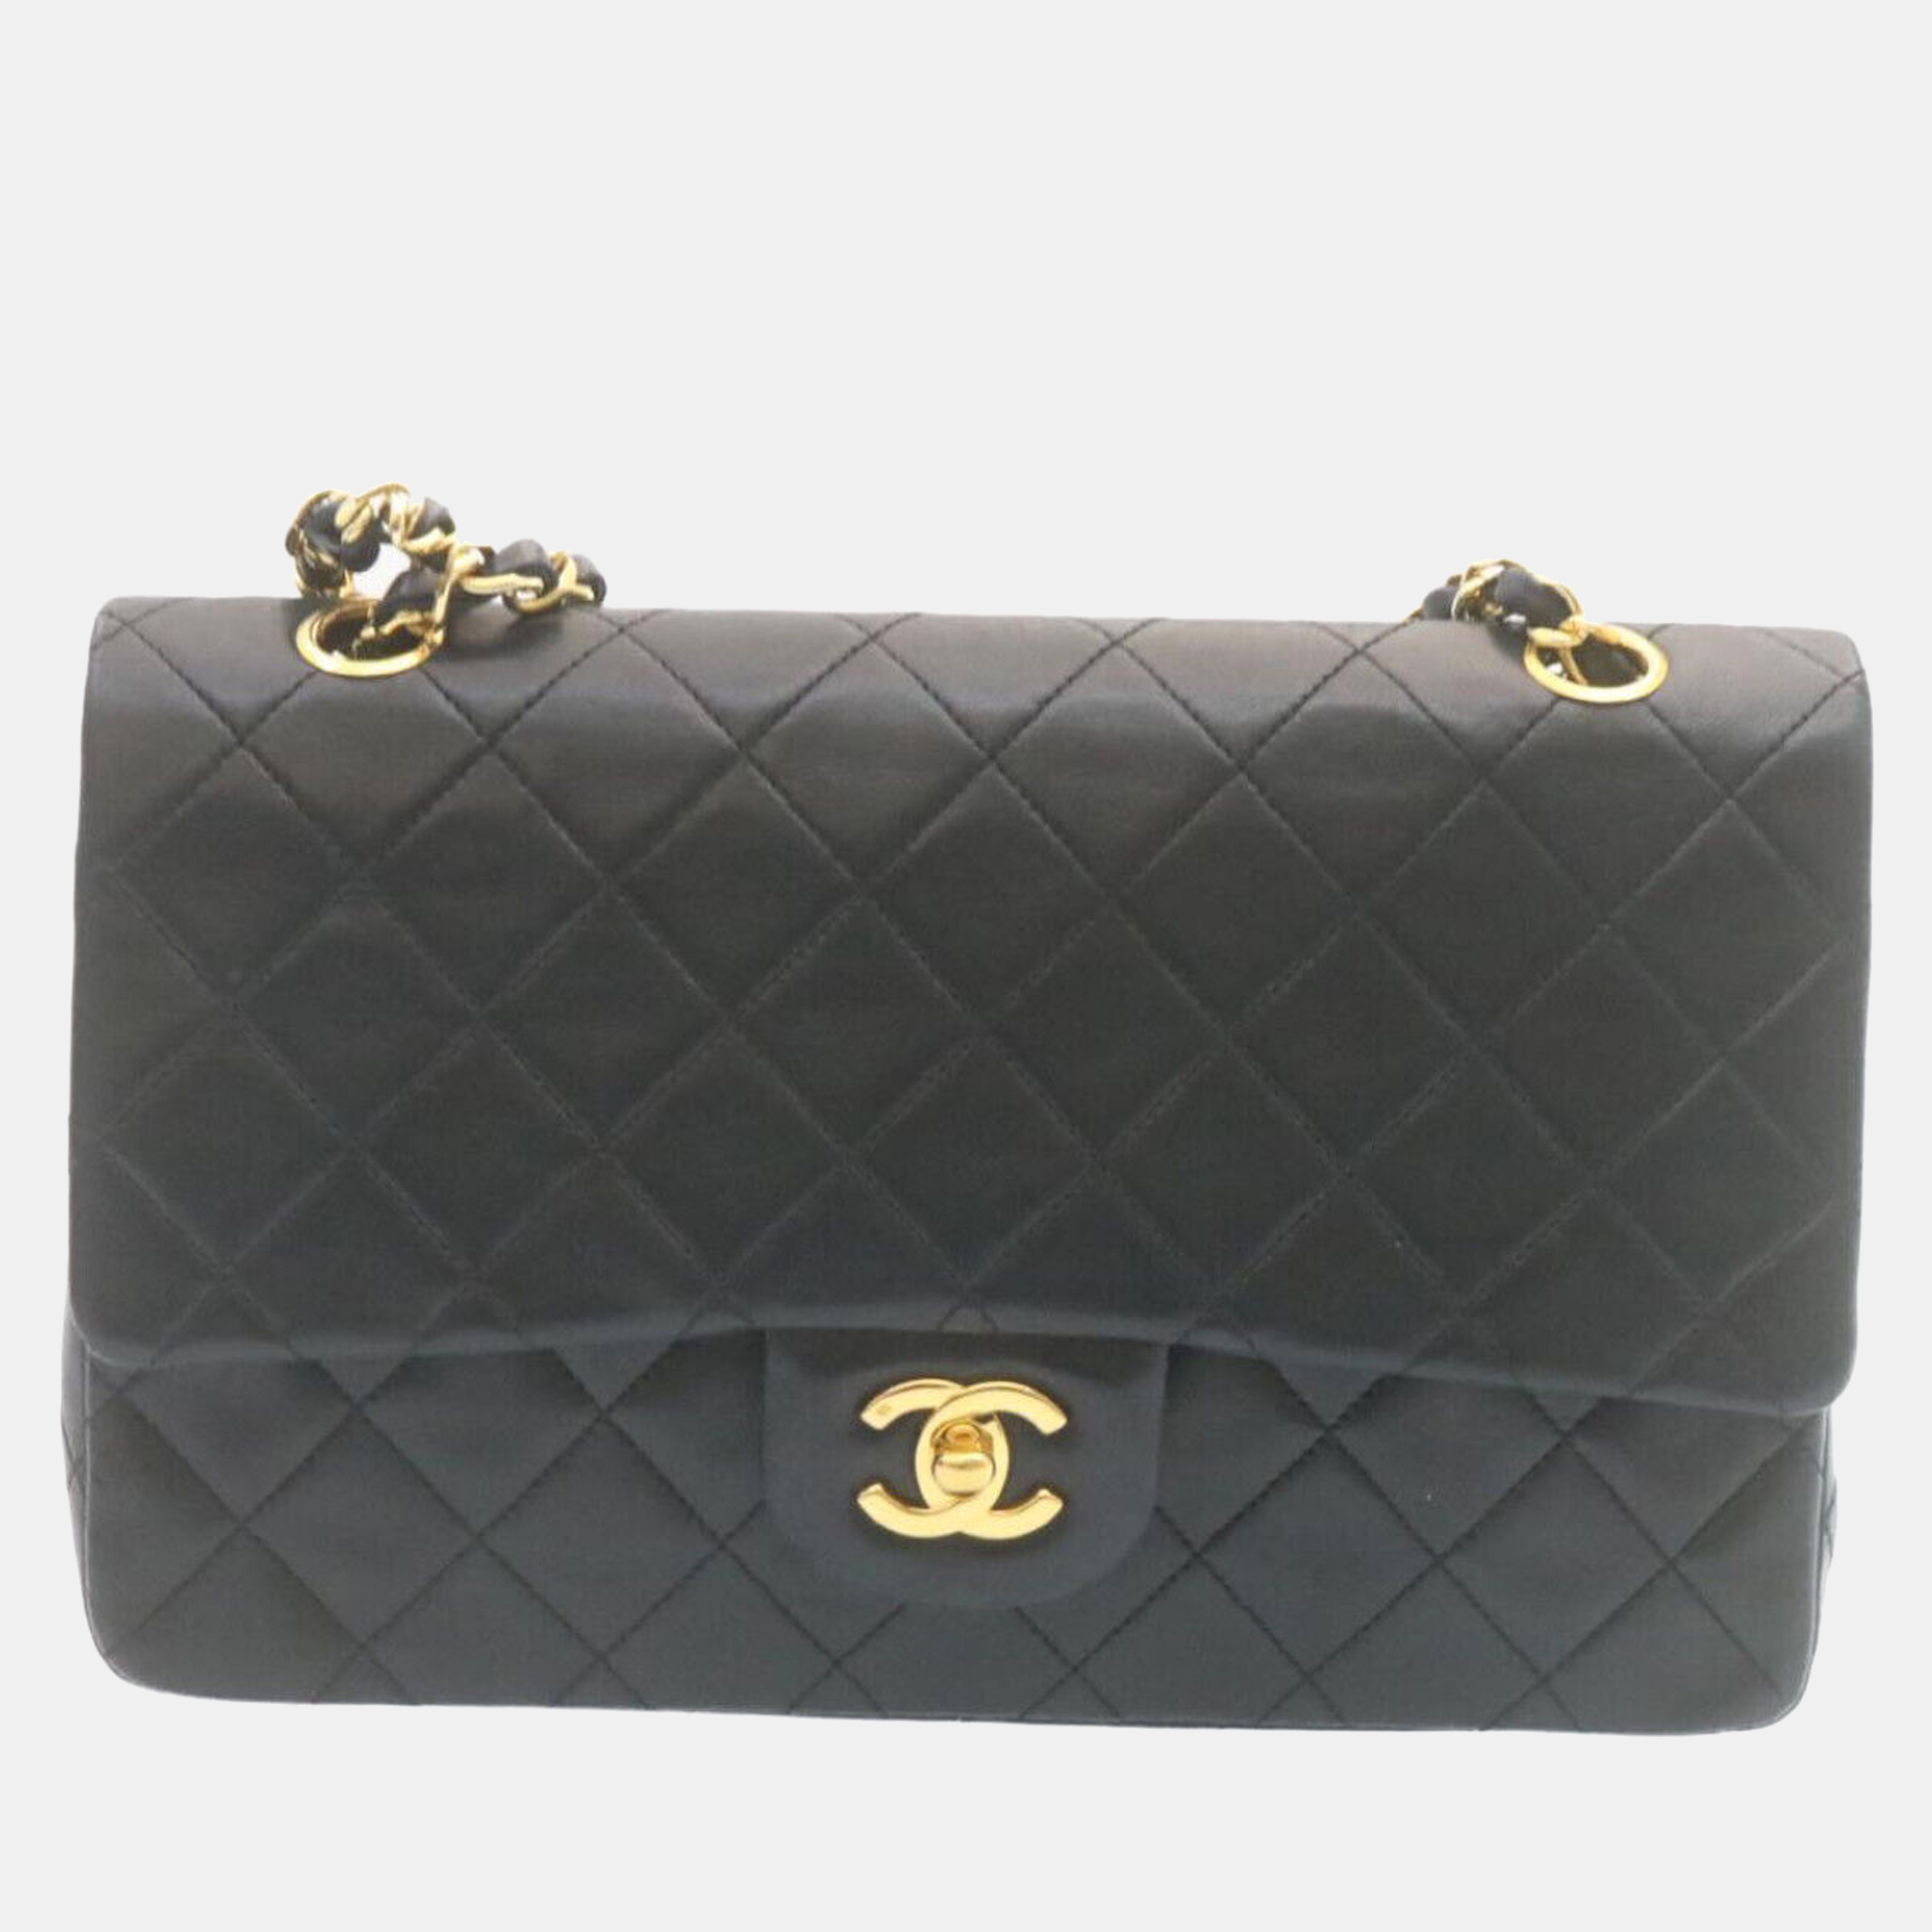 Pre-owned Chanel Black Lambskin Leather Medium Classic Double Flap Bag